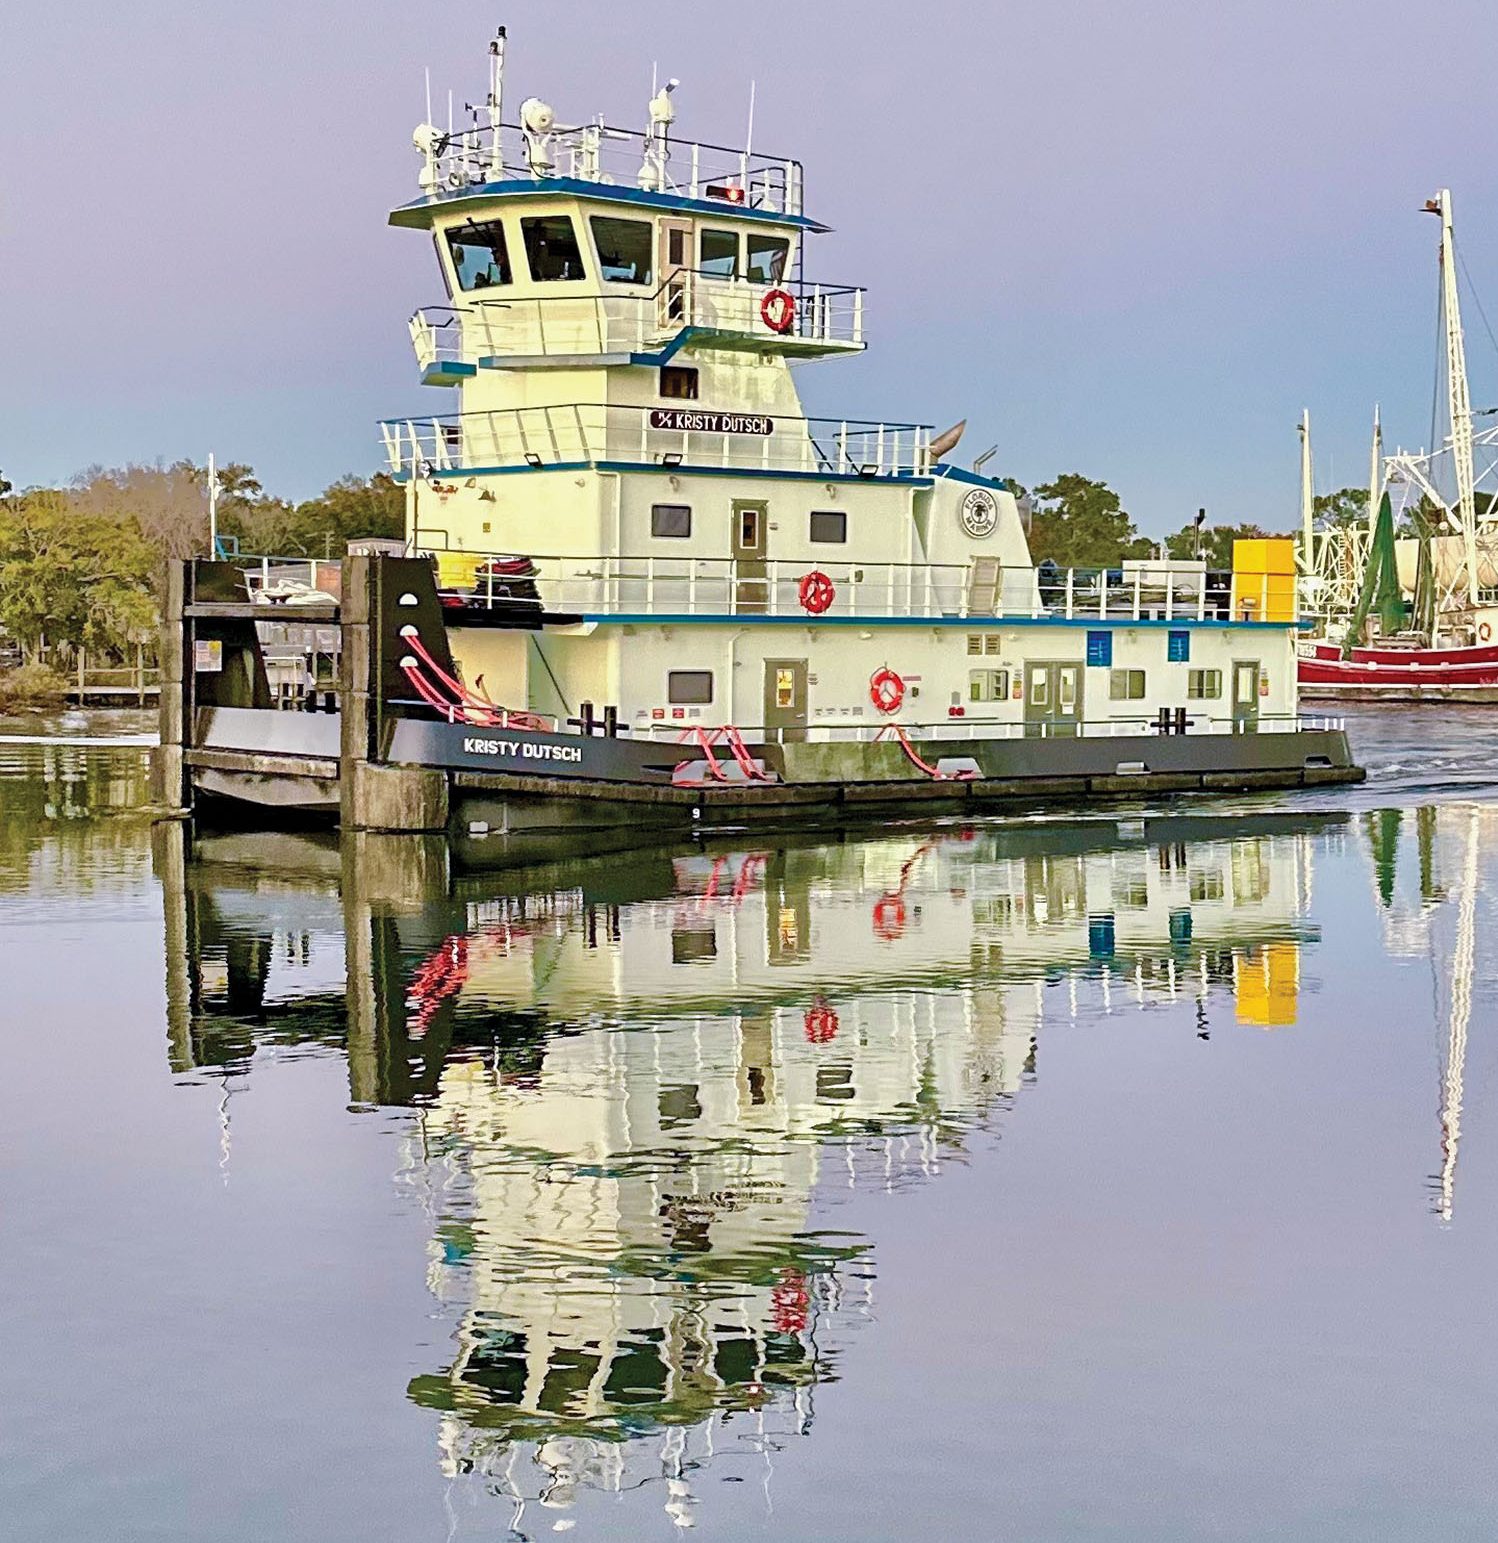 The 2,000 hp. mv. Kristy Dutsch is the fifth of six identical towboats being built for Florida Marine Transporters by Steiner Shipyard. (Photo courtesy of Steiner Shipyard)